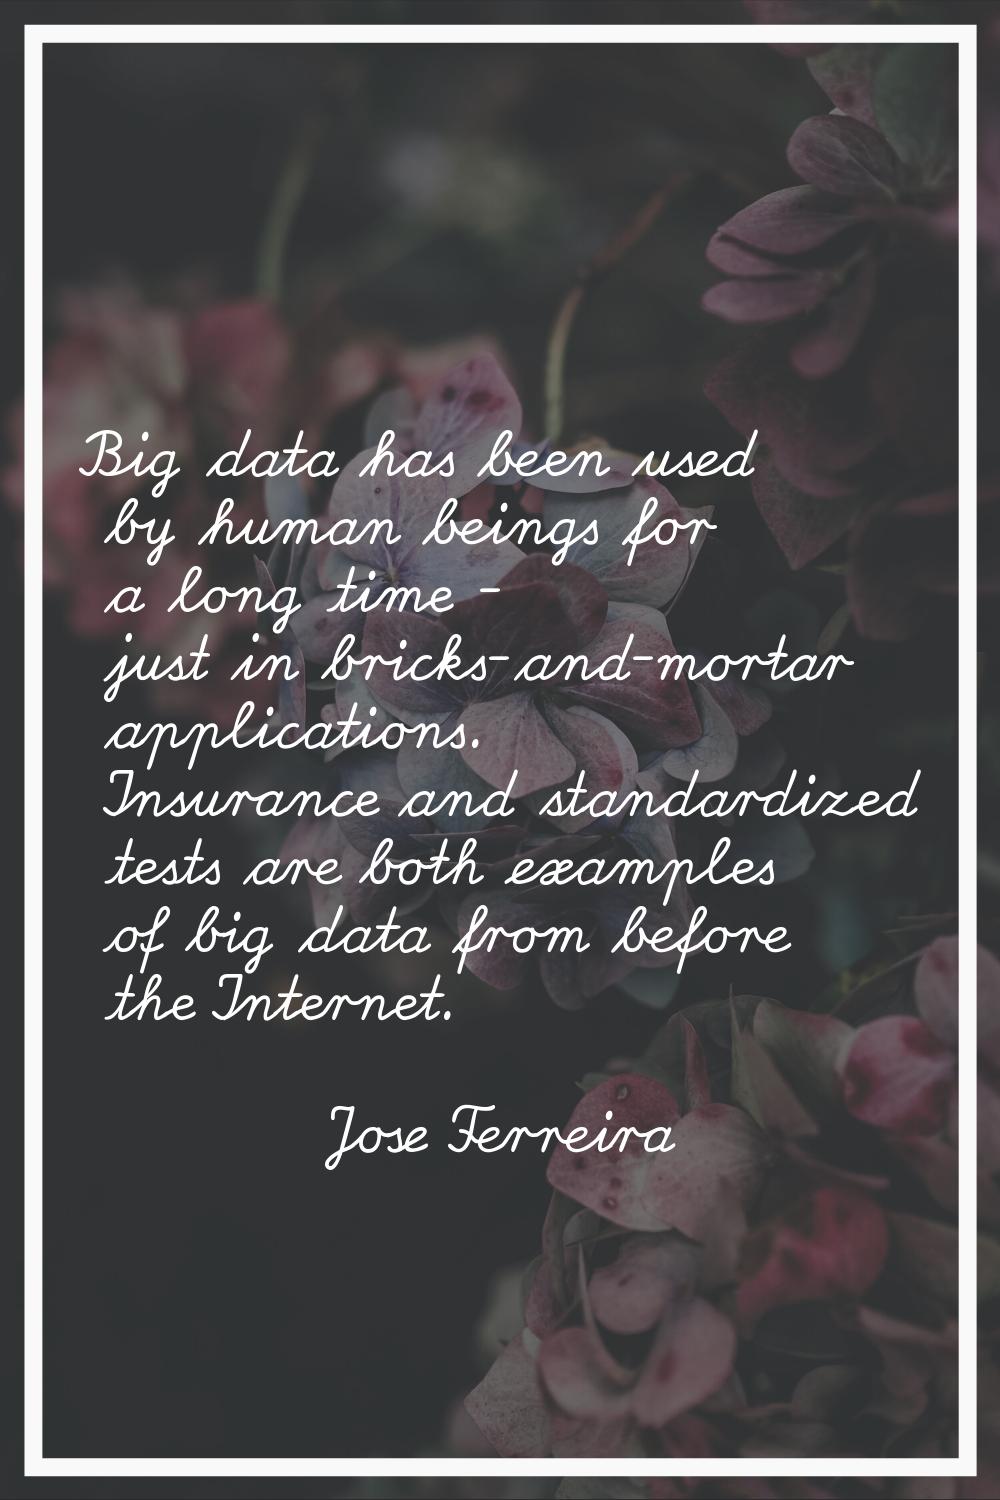 Big data has been used by human beings for a long time - just in bricks-and-mortar applications. In